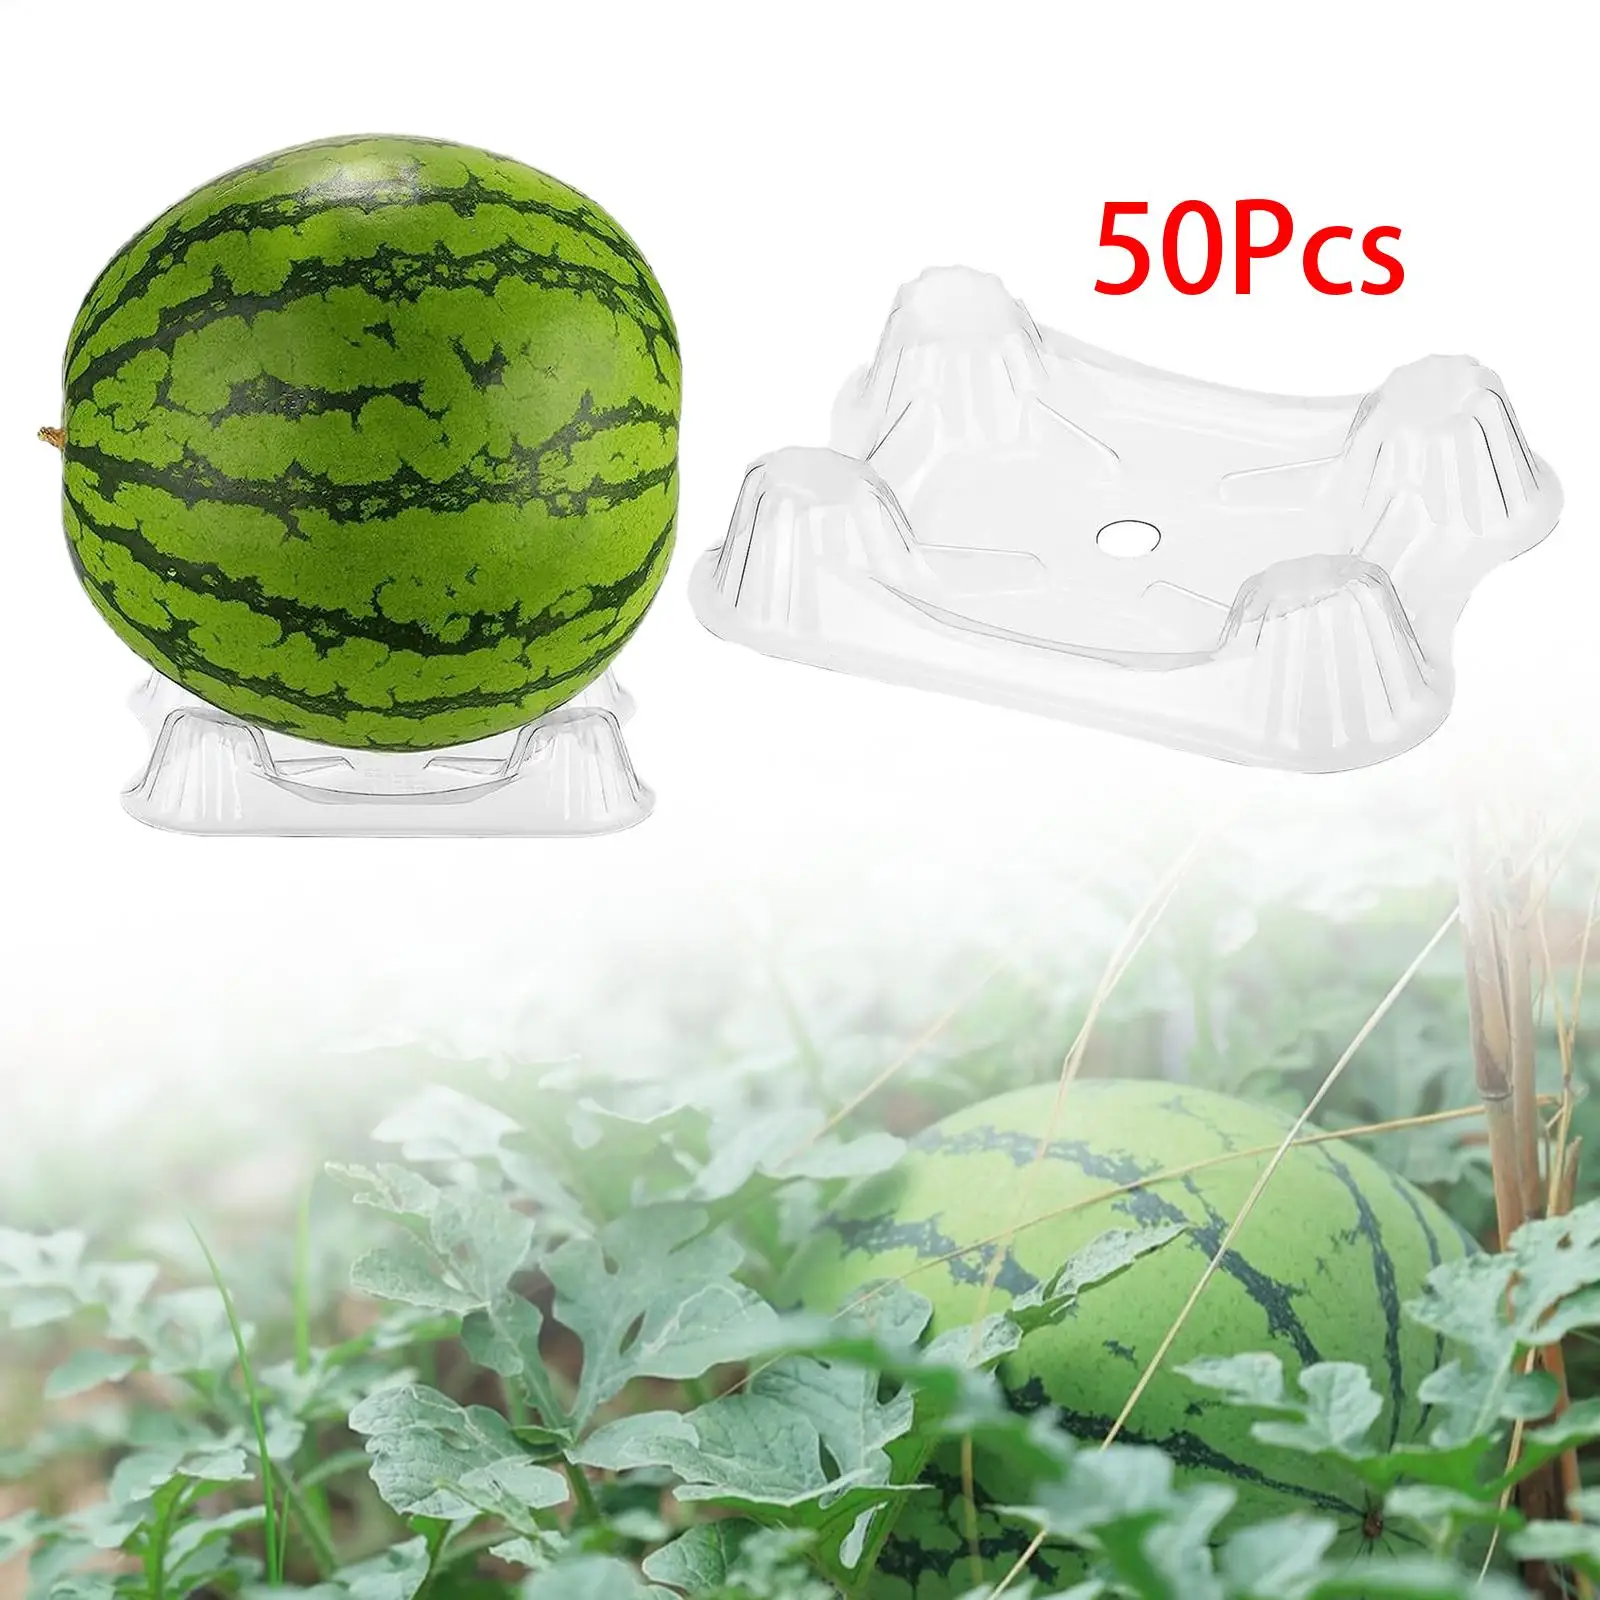 50x Melon Support Cradle Holds up to 20 kg Watermelon Holder Watermelon Support Stand for Watermelon Strawberry Cantaloupe Accs